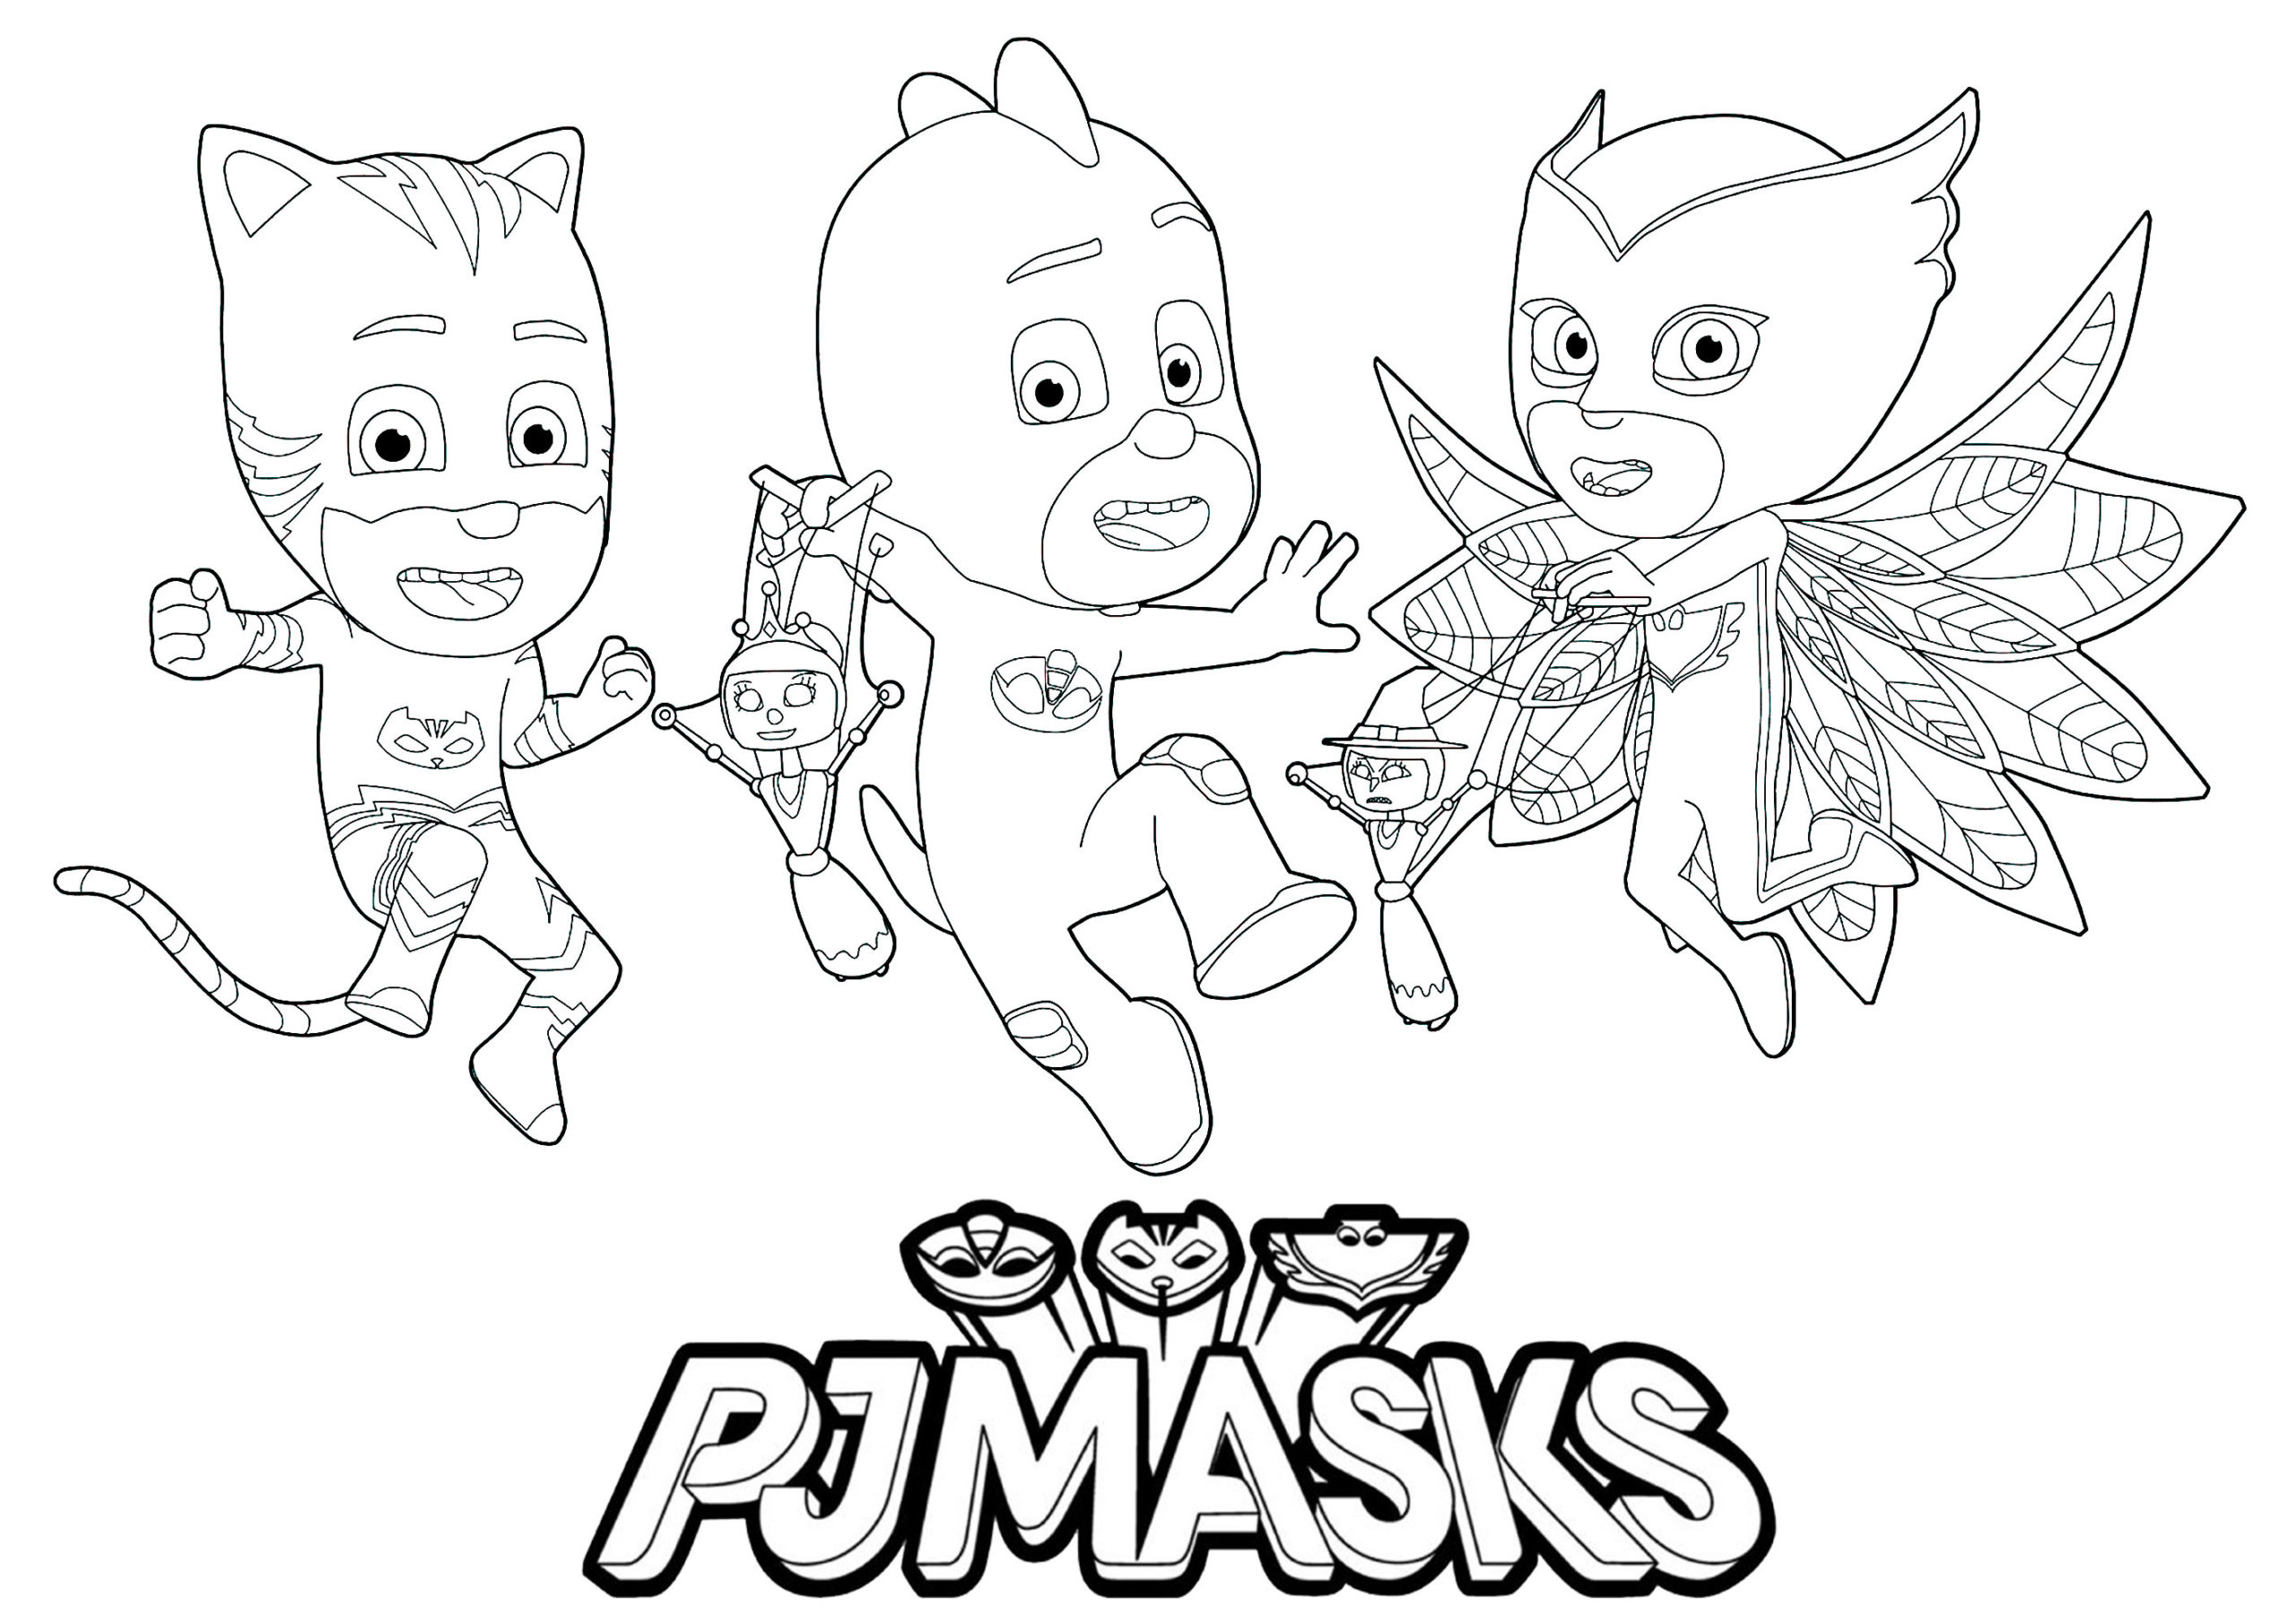 Coloring Pages : Pj Masks To Print For Free Kids Coloring Mask ...